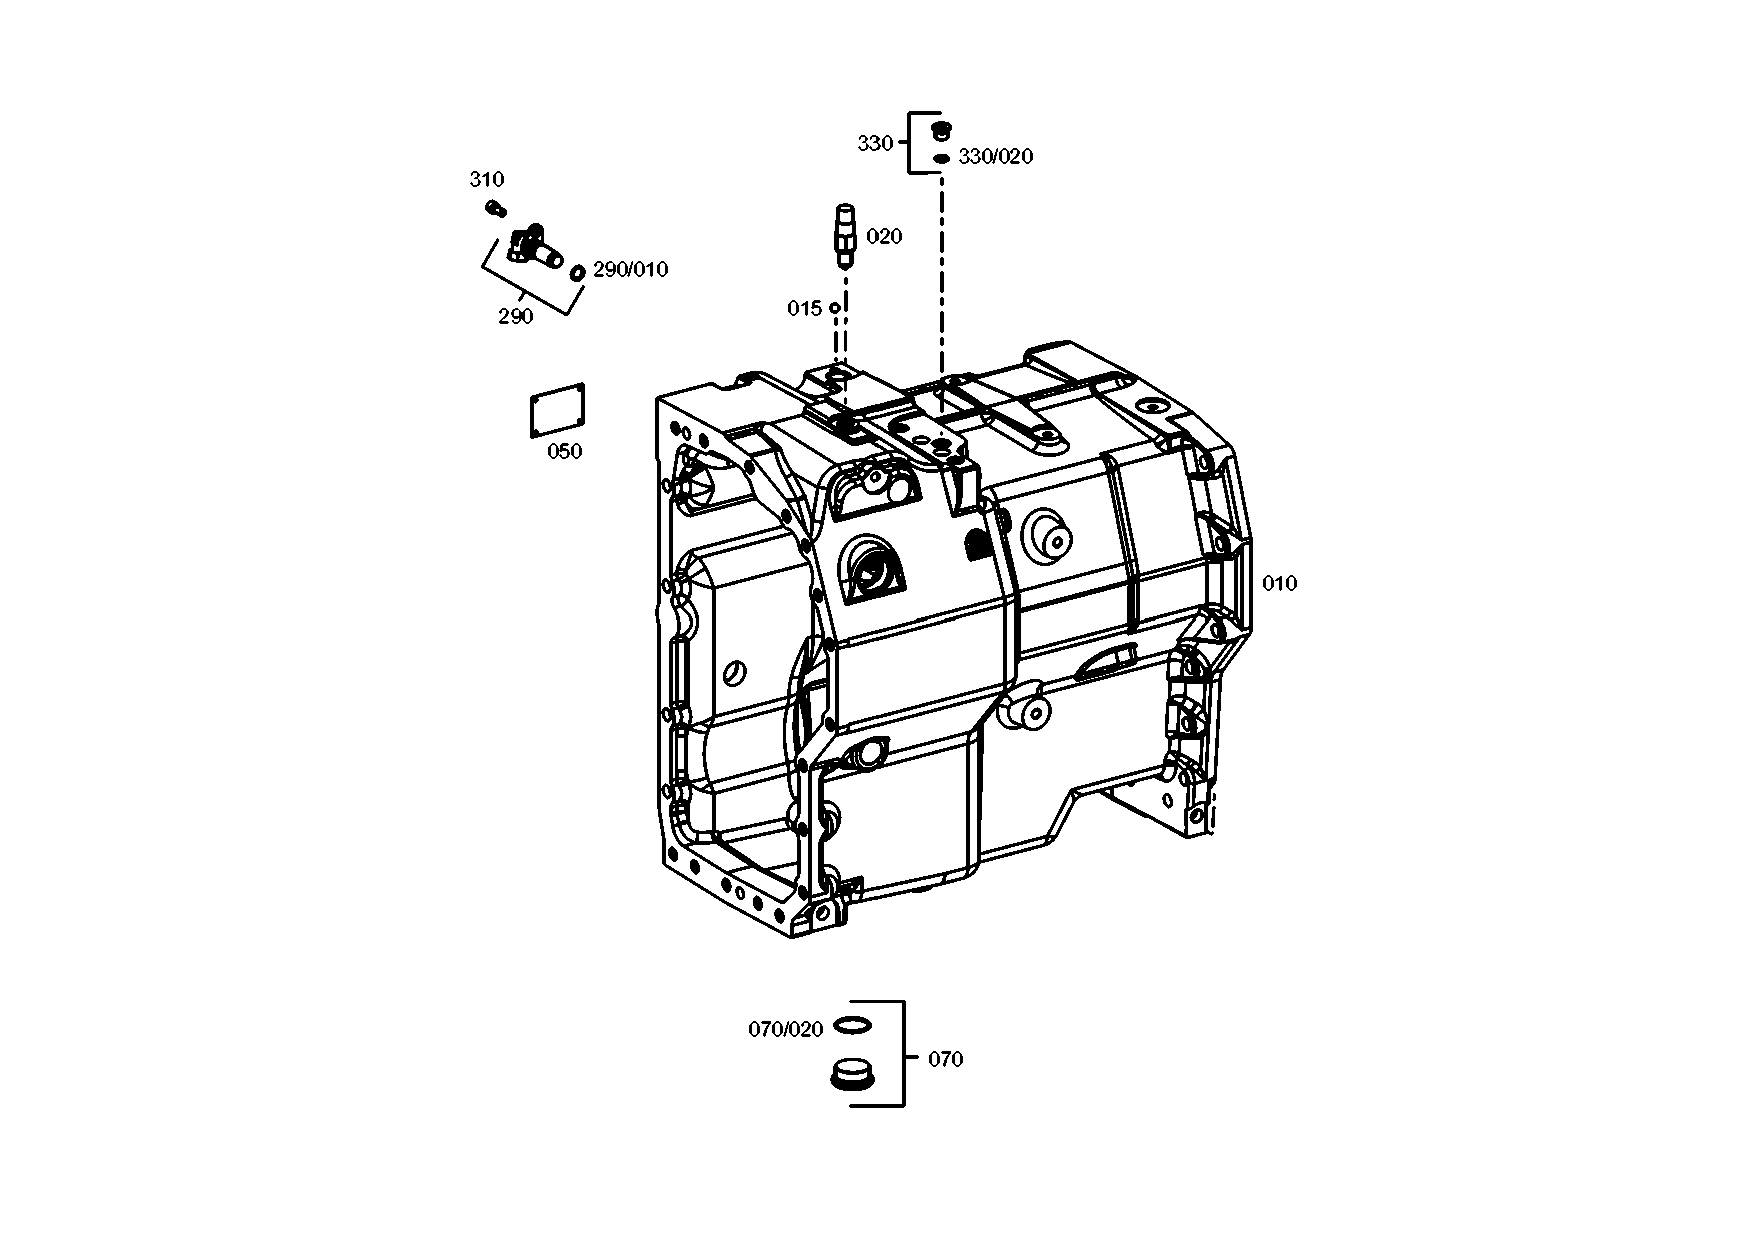 drawing for AGCO 35117900 - SPEED TRANSMITTER